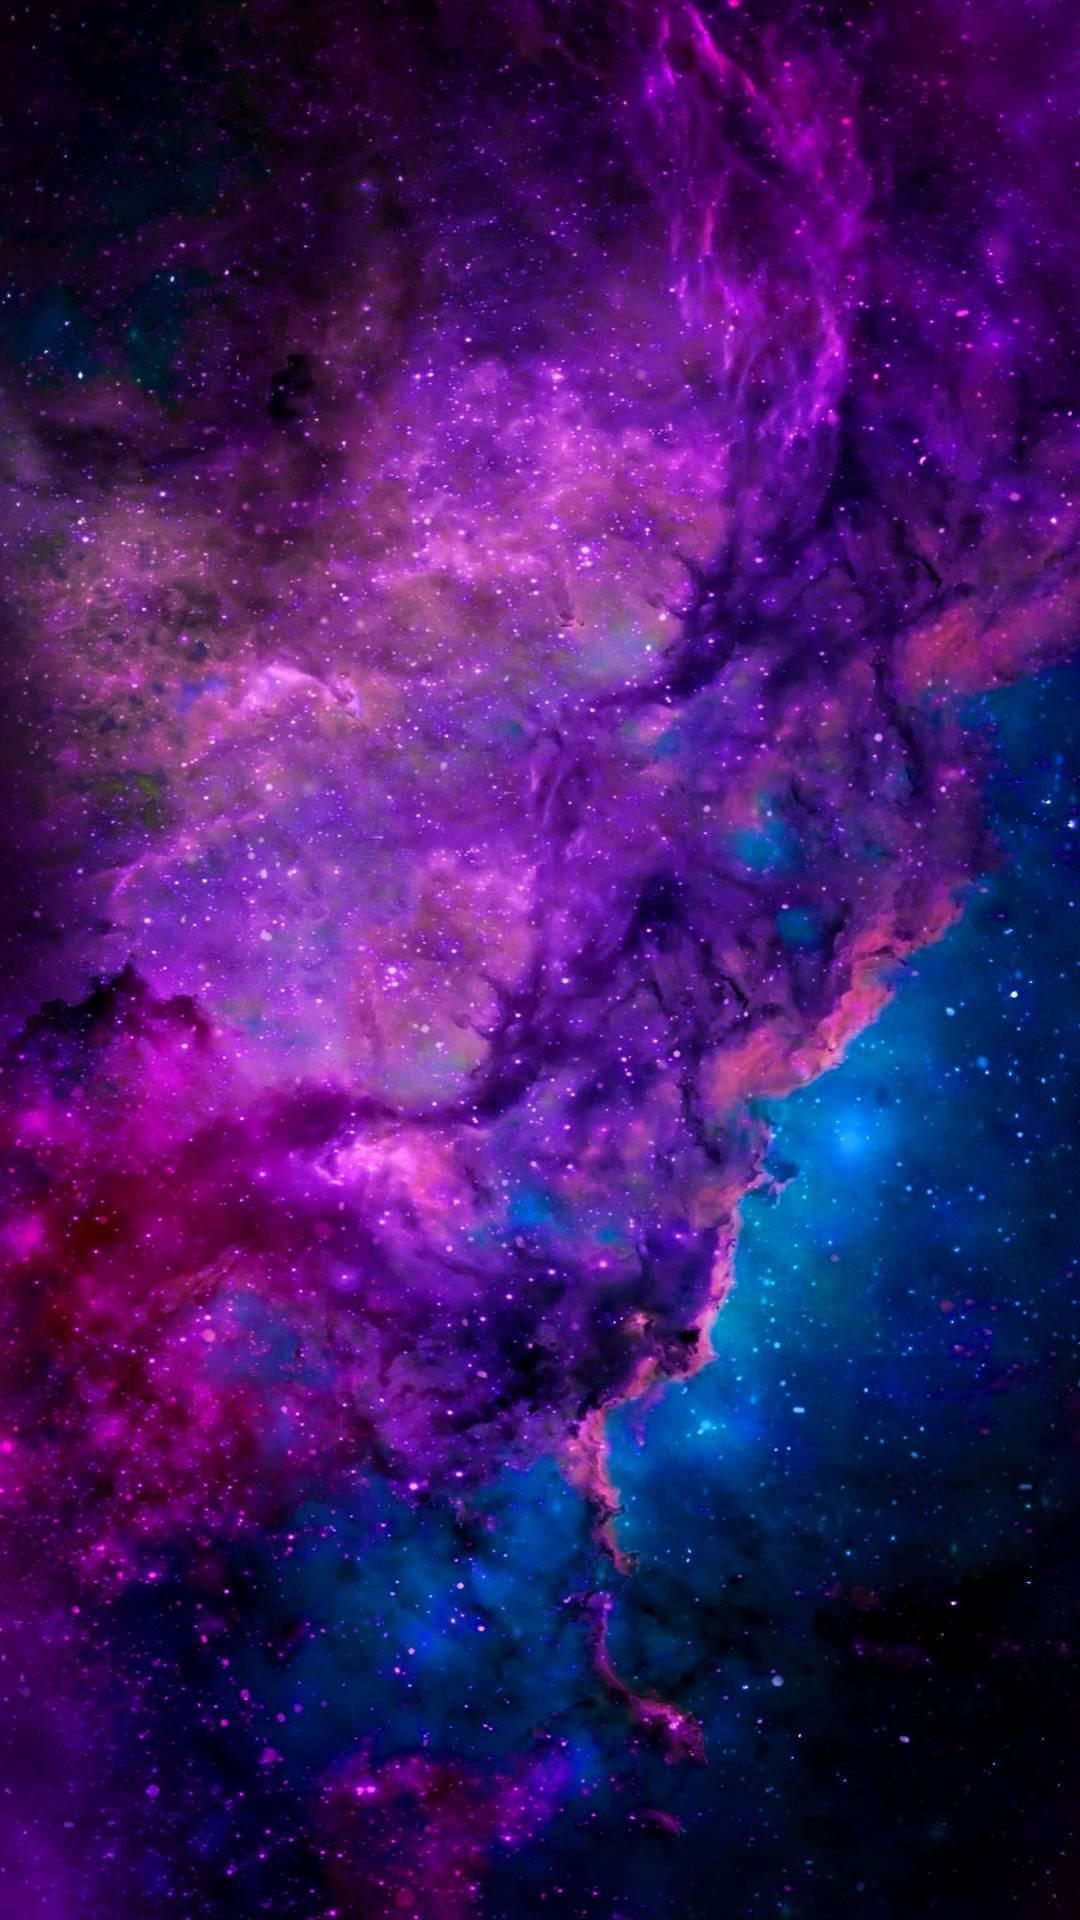 So I was looking for a new phone wallpaper with subtle bi colours and I fell in love with this picture, thought I might share <3